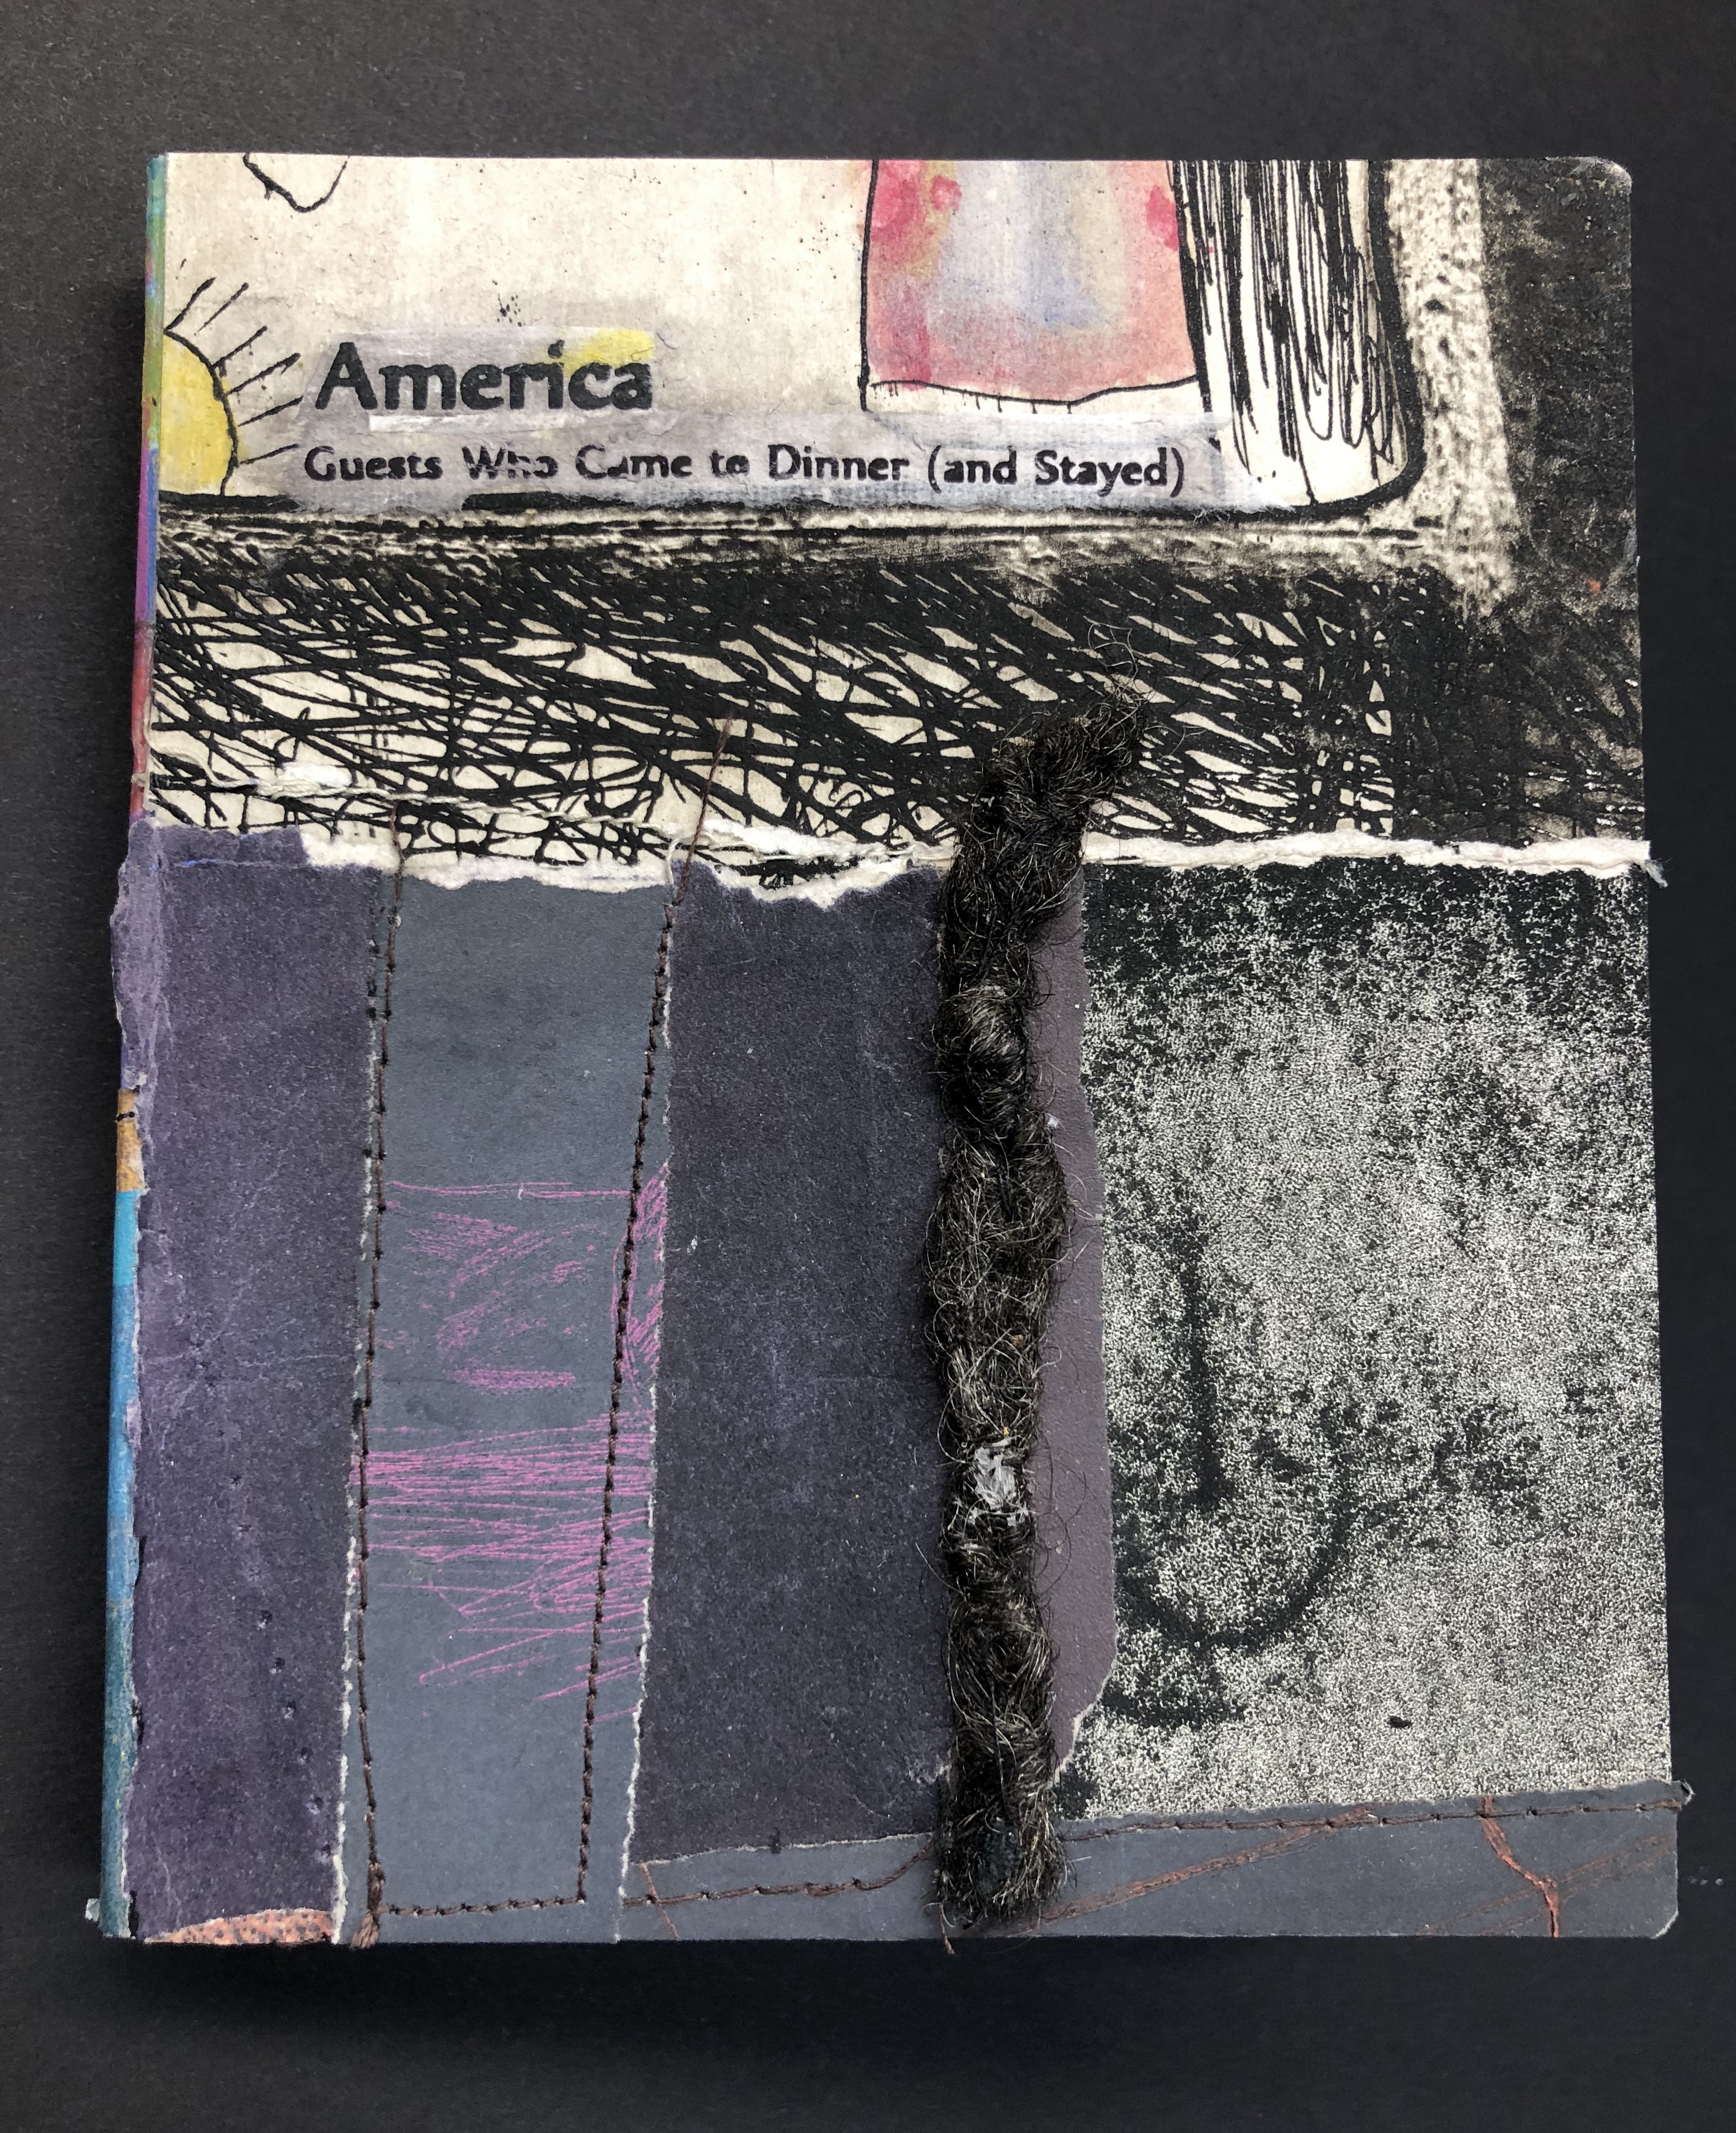 America: Guests Who Came to Dinner (and Stayed) #25, 2018 Hand-made artist book
Ink, thread, hair  6 x 5 inches